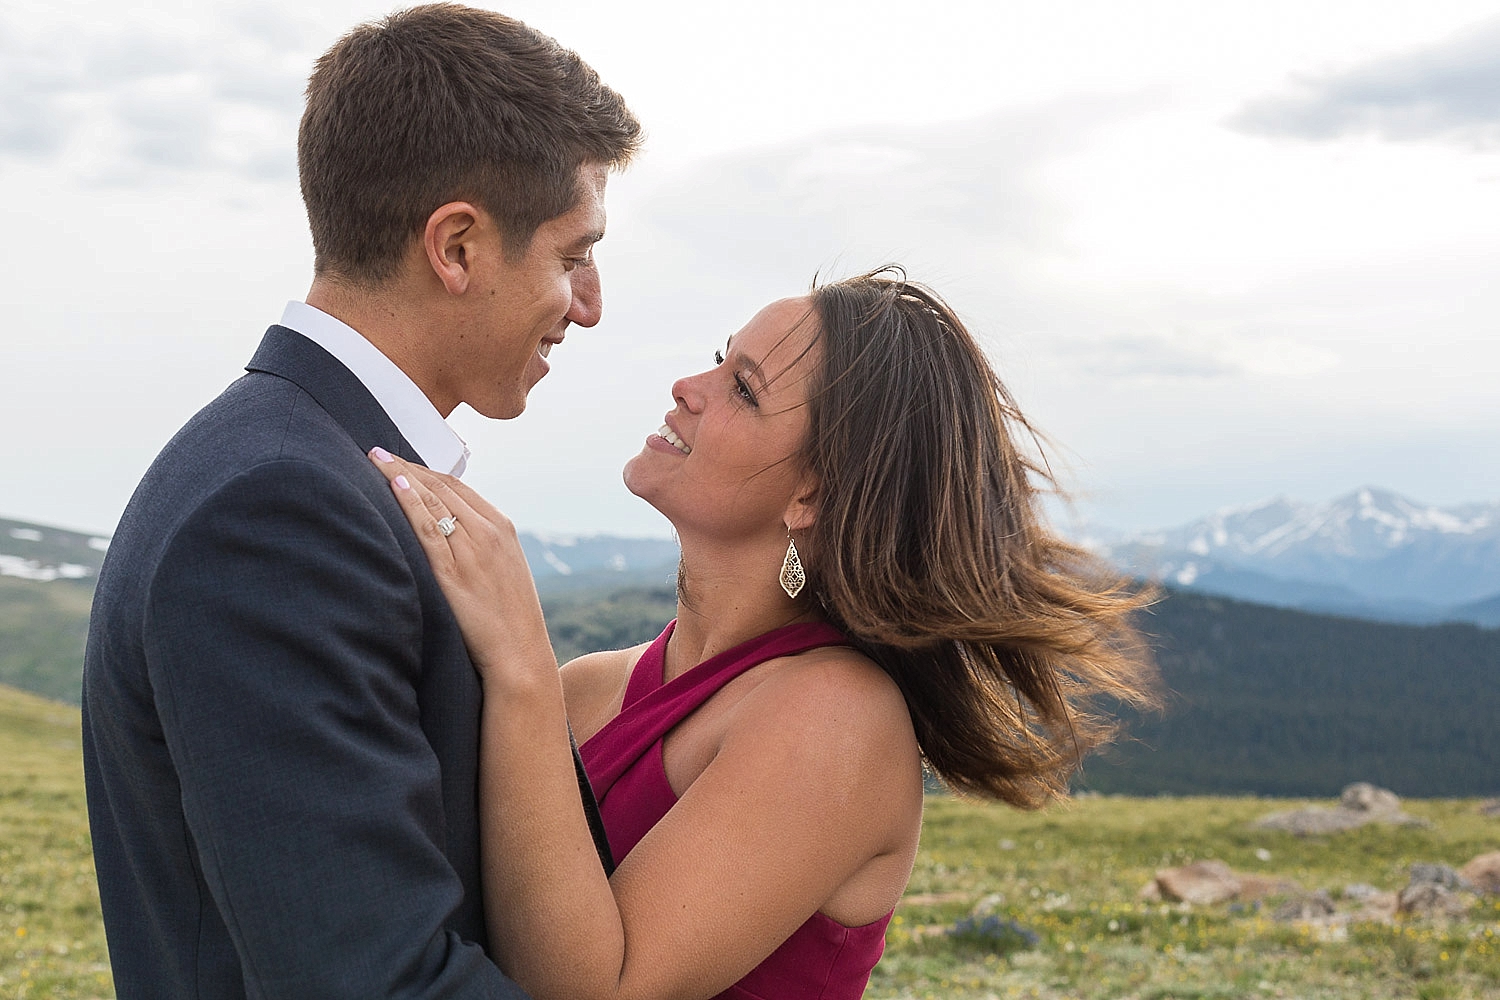 Mt Evans Engagement Shoot with Mountain Views